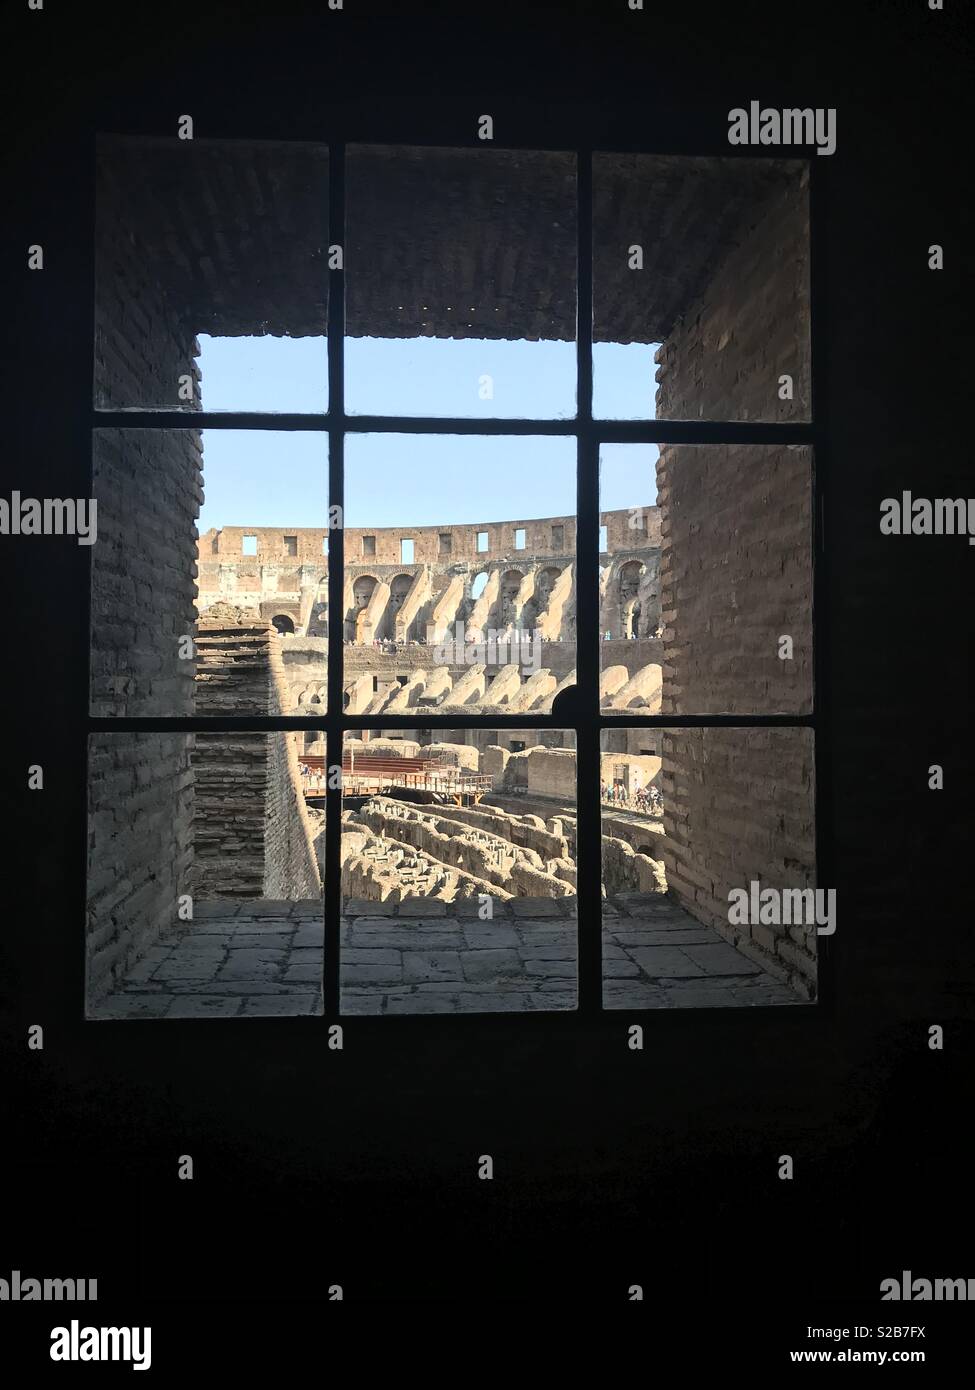 Looking through the window to the colloseum Stock Photo